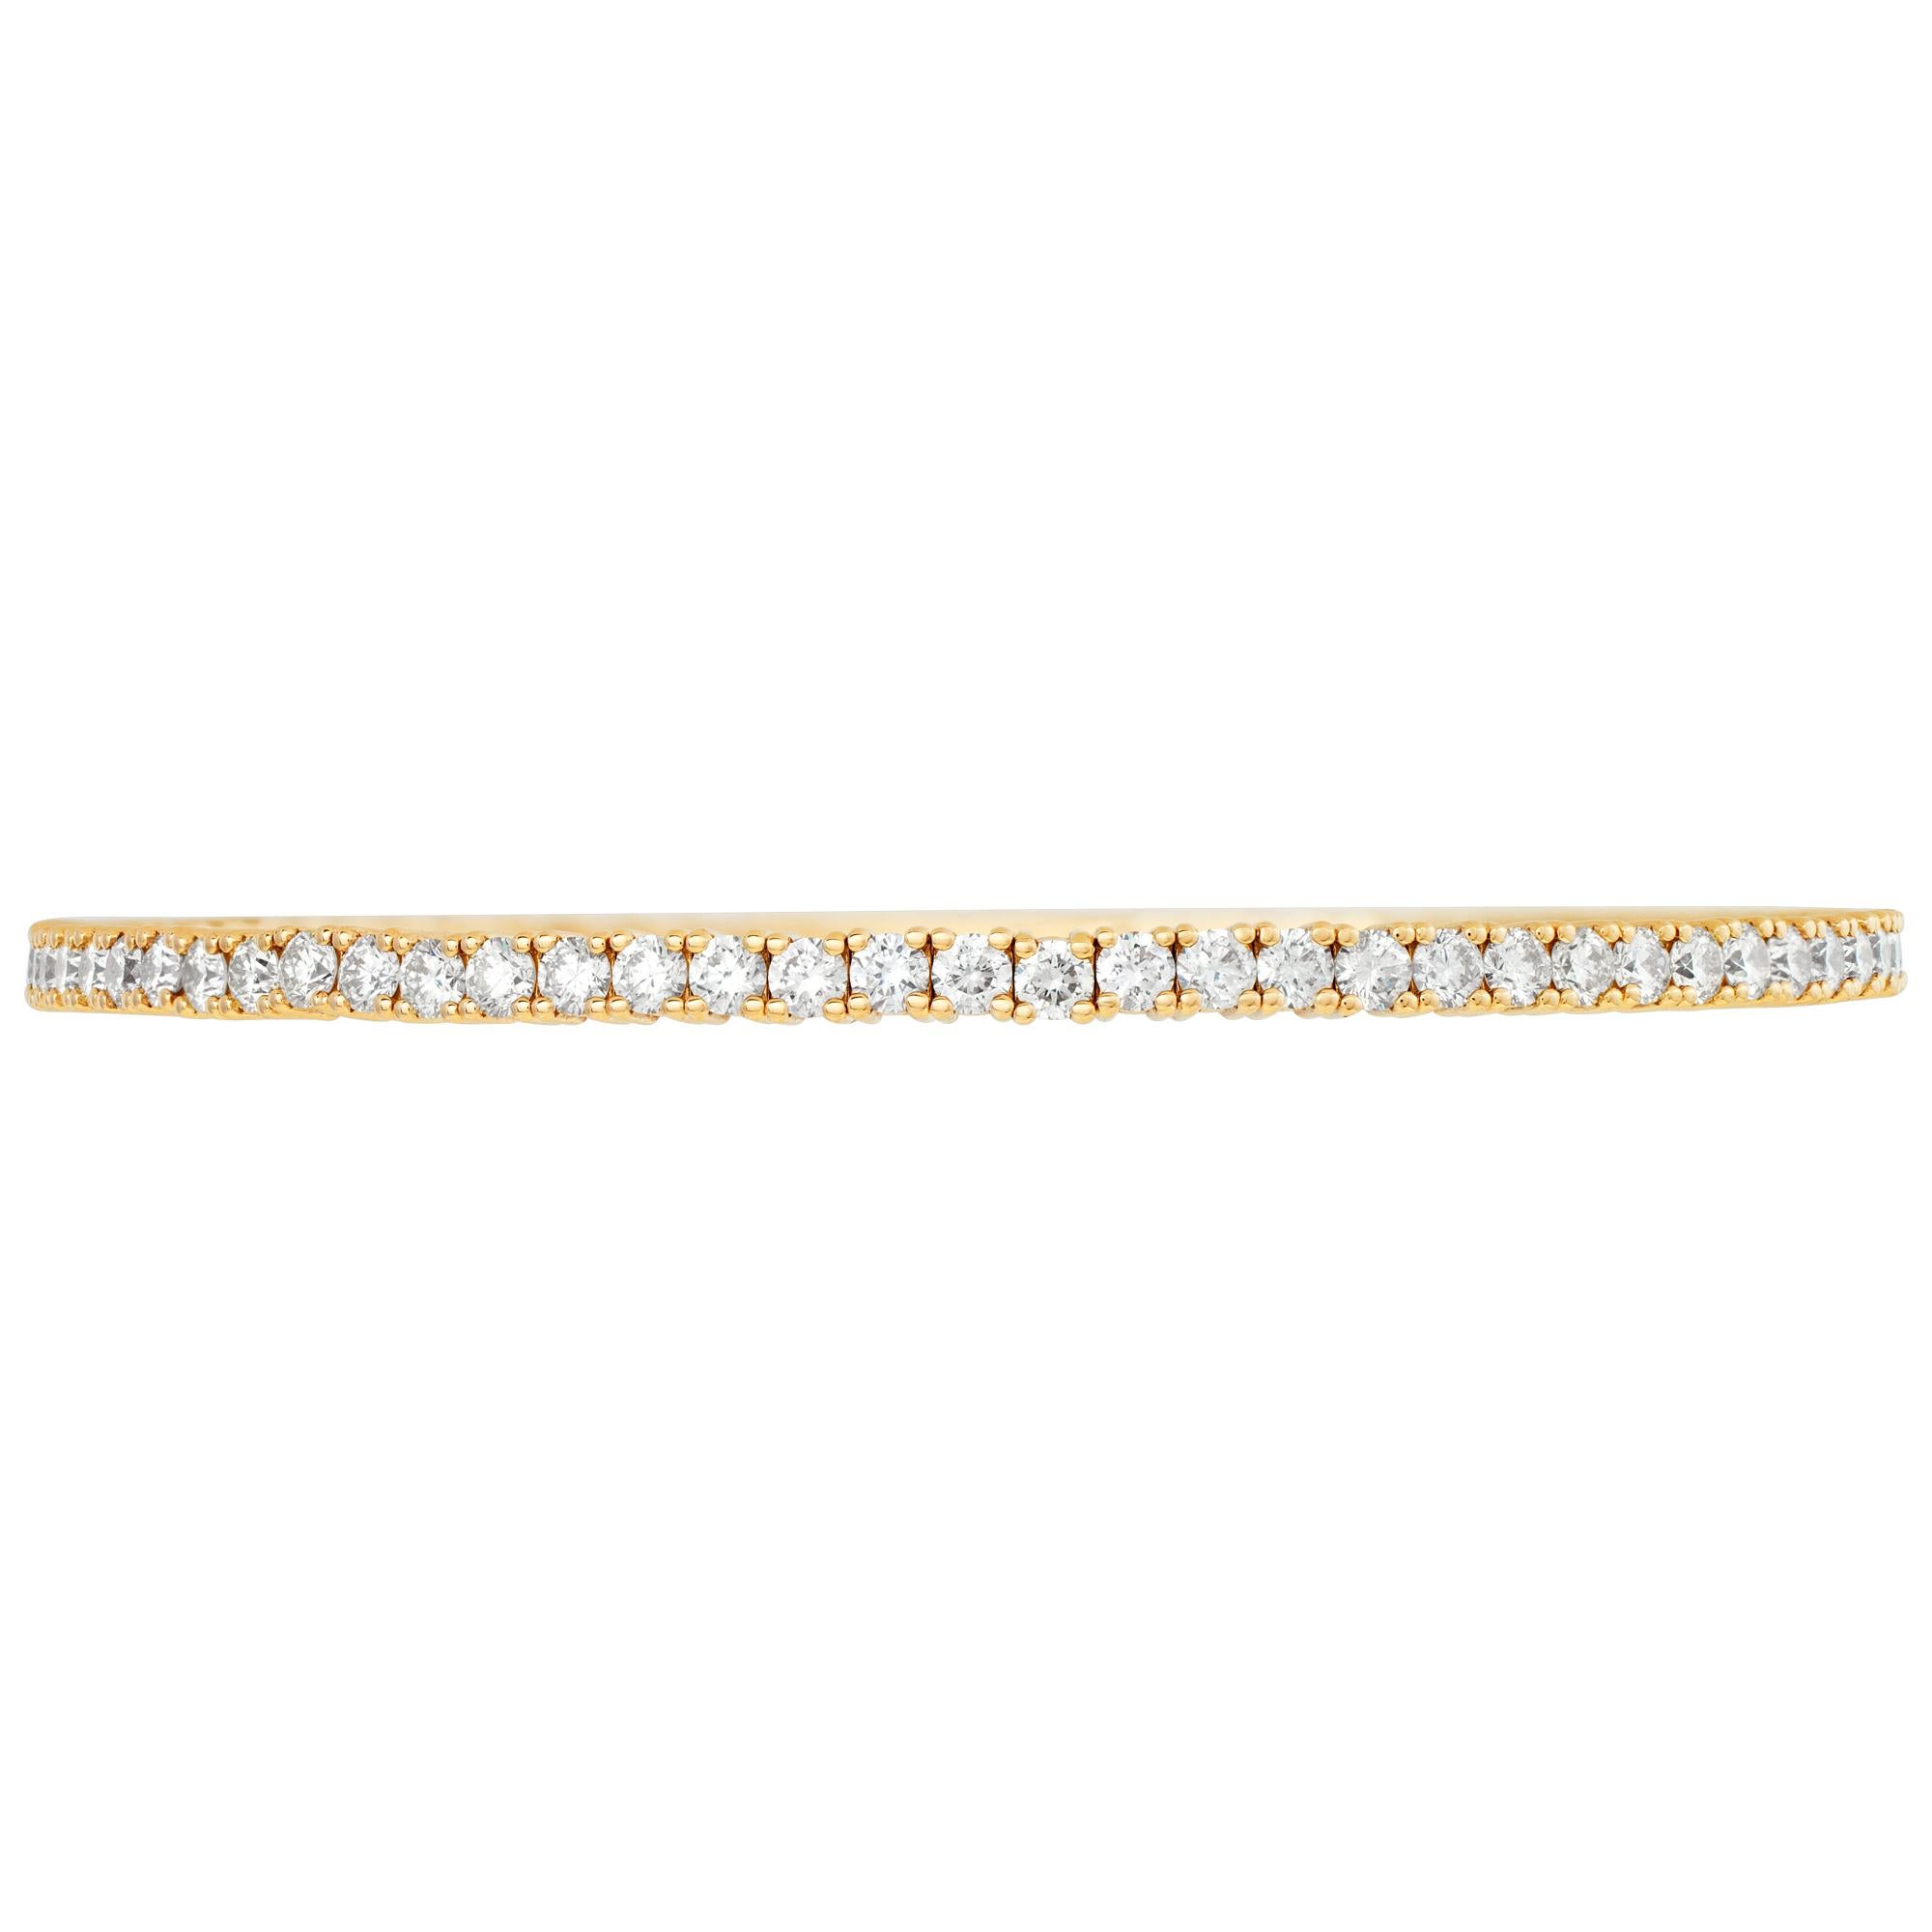 Flexible diamond line bangle bracelet in 14k yellow gold with approximately 3.95 carats in round diamonds (H-I color, SI clarity). 2.4mm width. Size 7.